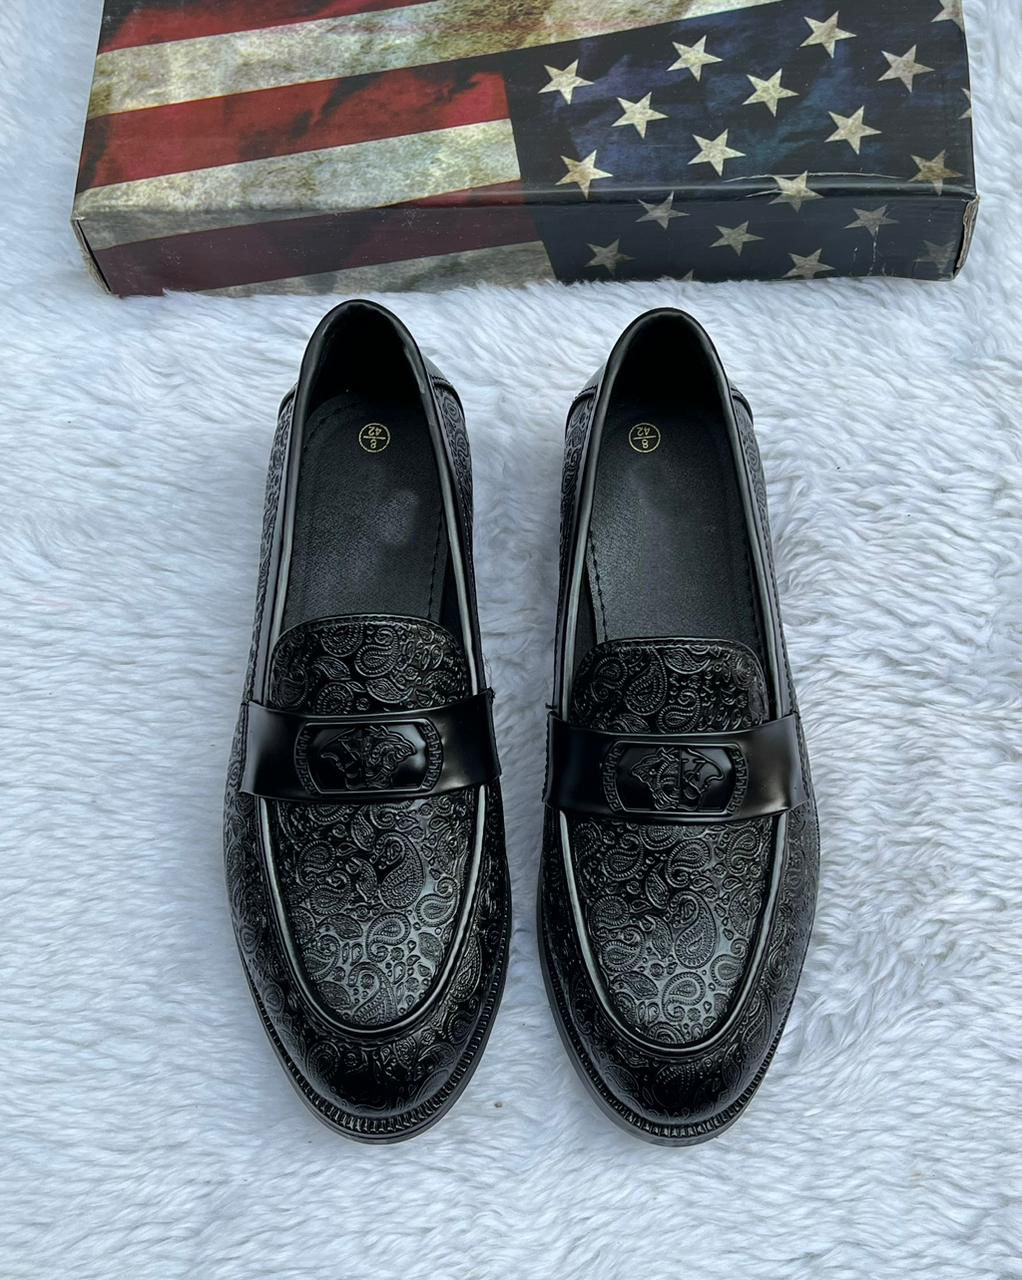 Imported Stylish Pattern Black Moccasins Loafer Casual And Party Wear Shoes For Men- FunkyTradition